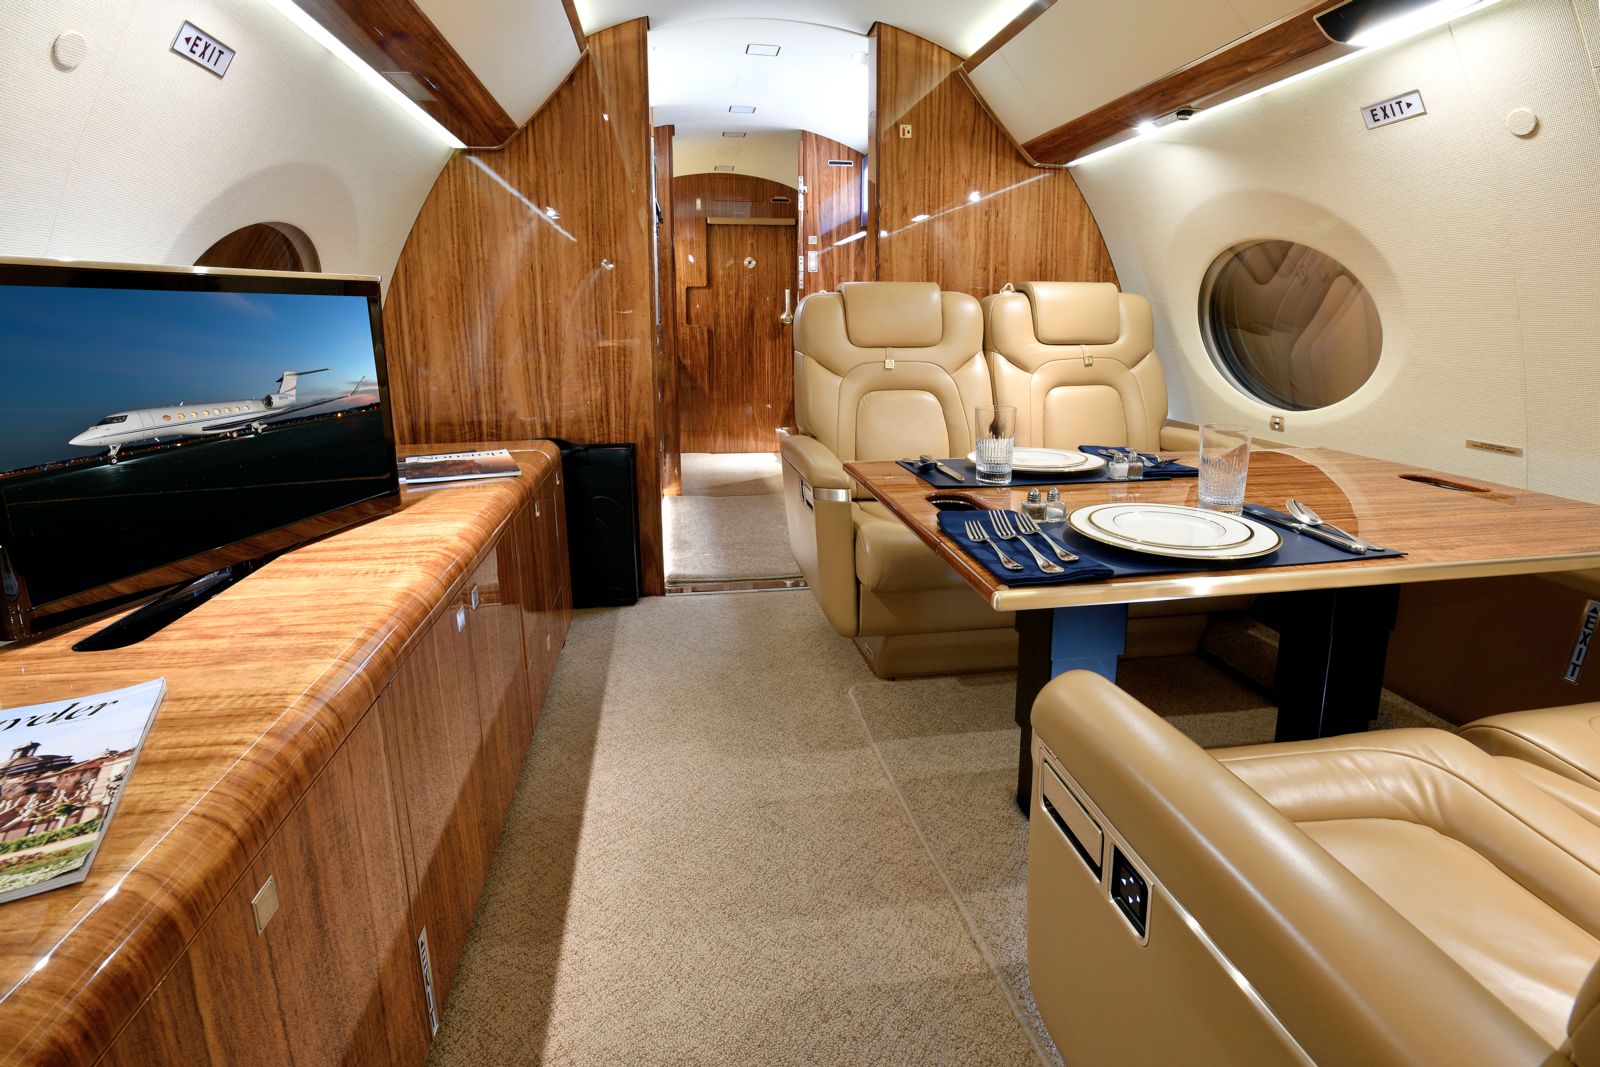 Gulfstream G650ER  S/N 6012 for sale | gallery image: /userfiles/images/G650_sn6012/aft%20aft.jpg